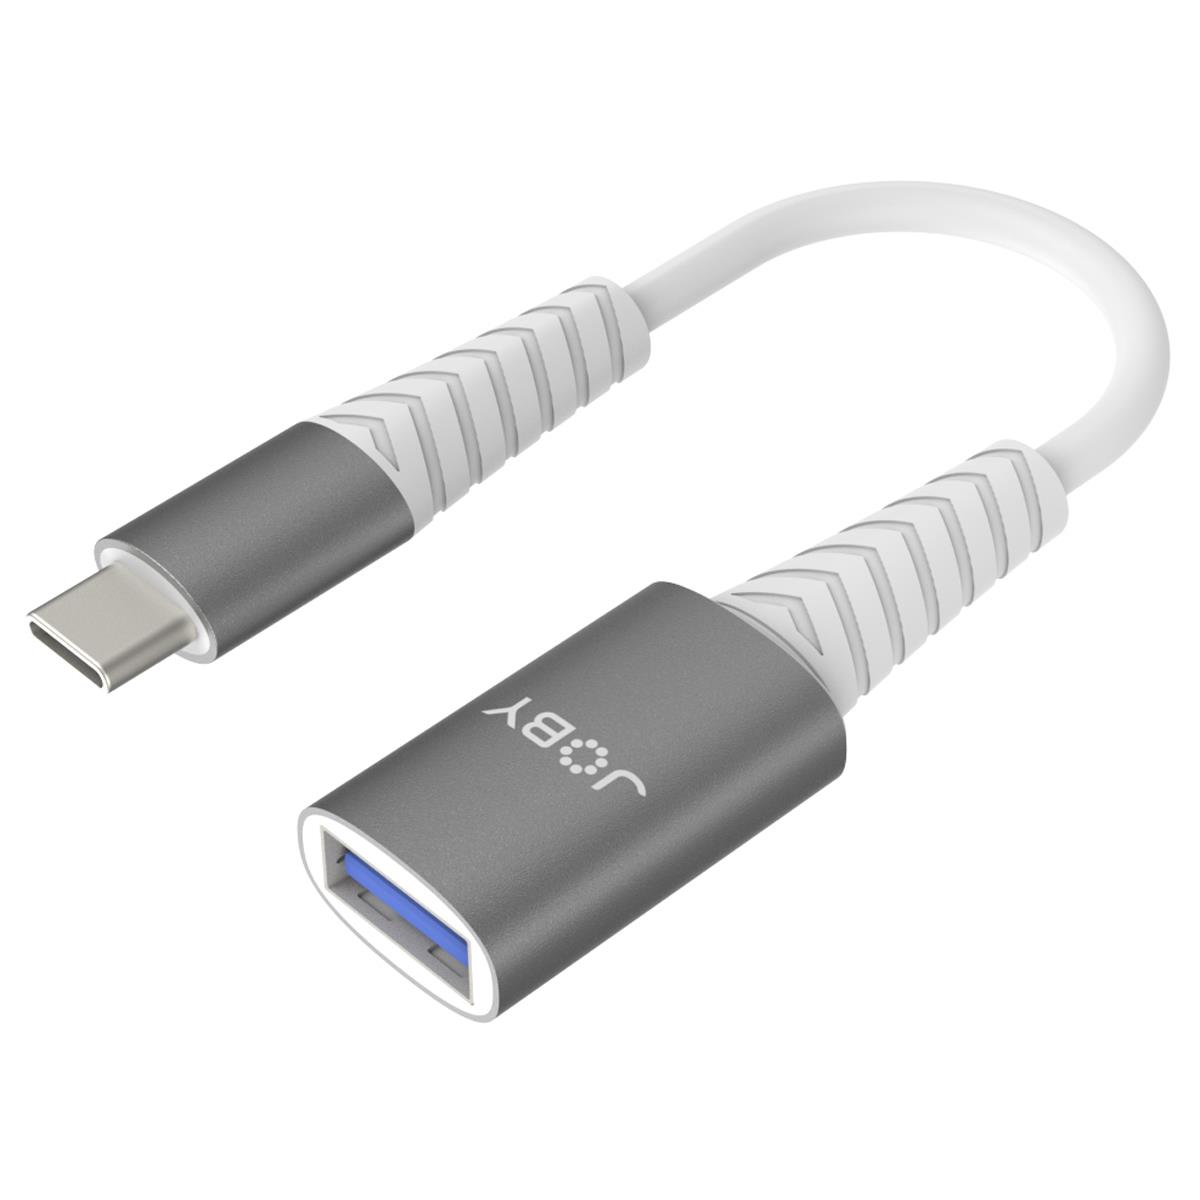 Image of JOBY USB Type-C to USB 3.0 Type-A Adapter